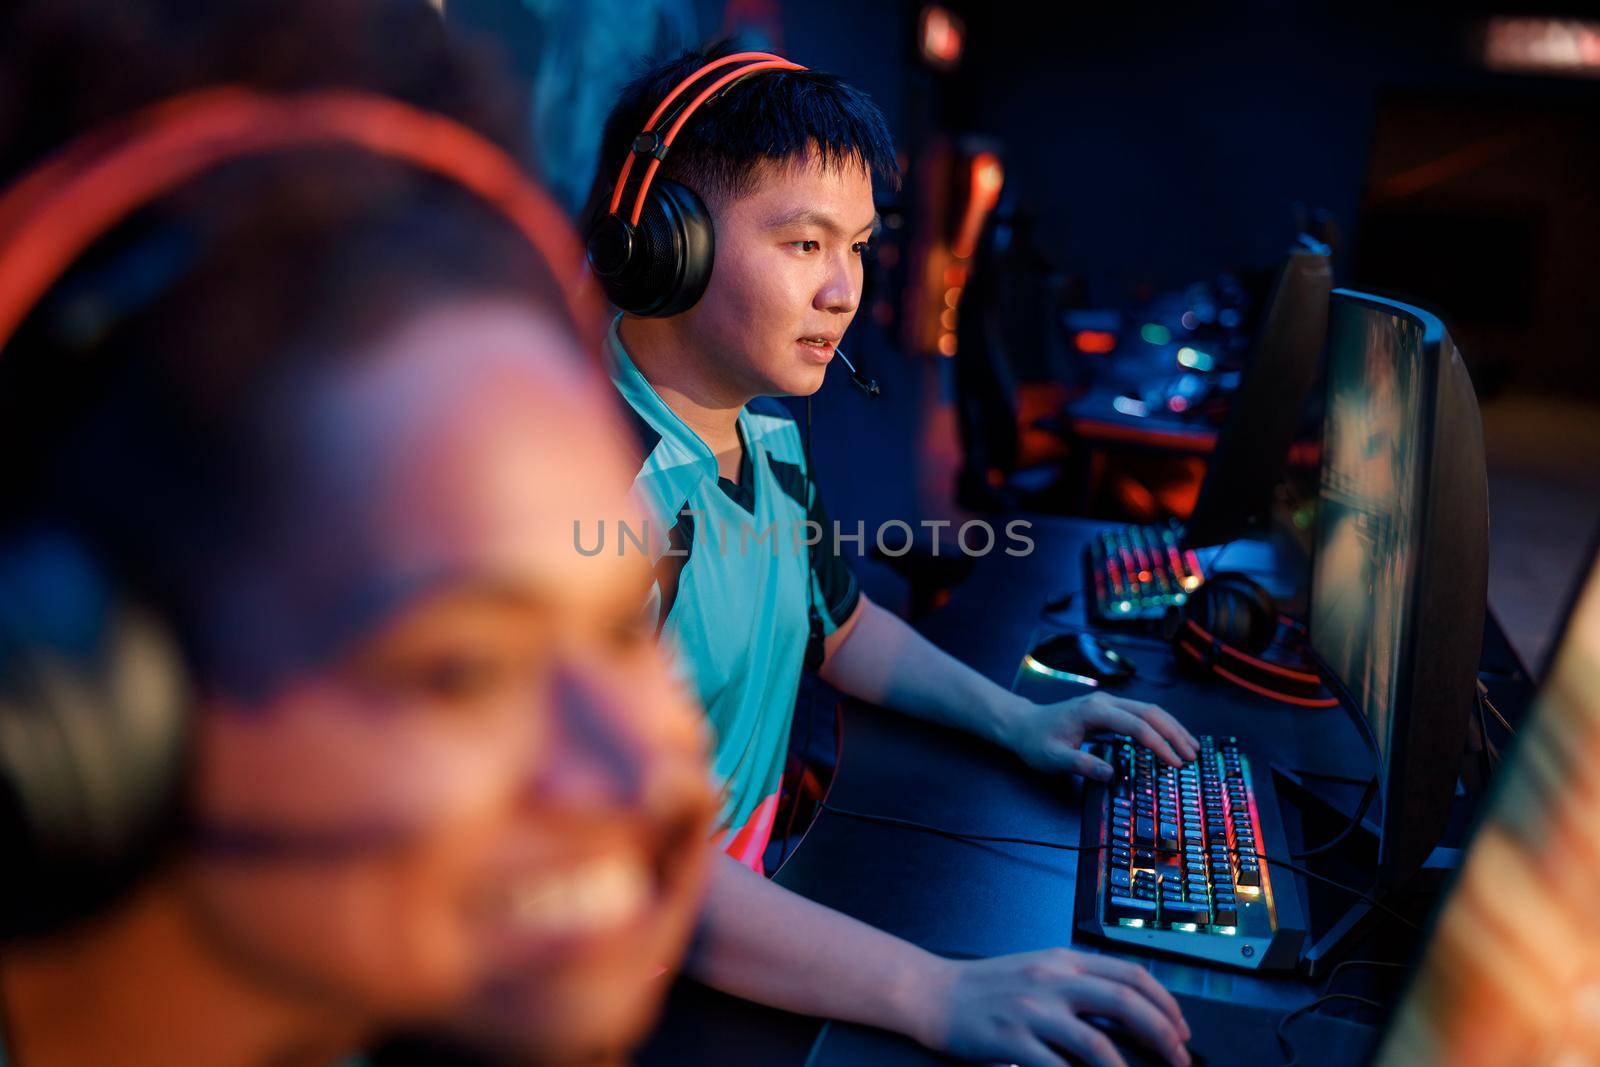 Concentrated Asian esports gamer wearing headset looking at PC monitor while practicing in online arena in contemporary e-sports club